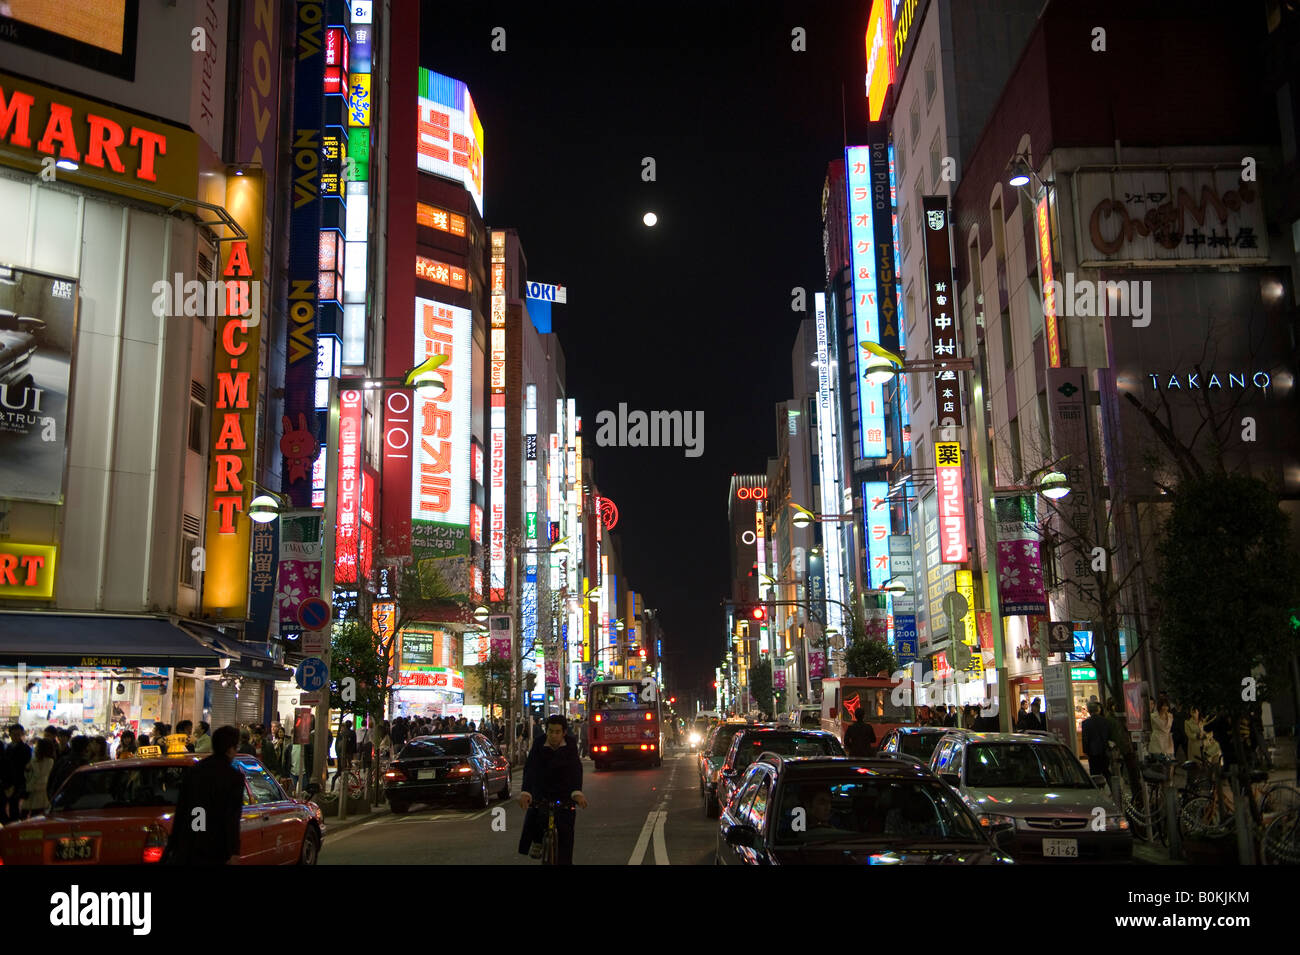 Tokyo, Japan. Neon lights in Shinjuku, with a full moon. The opening sequence of the movie 'Lost in Translation' was set here. Stock Photo